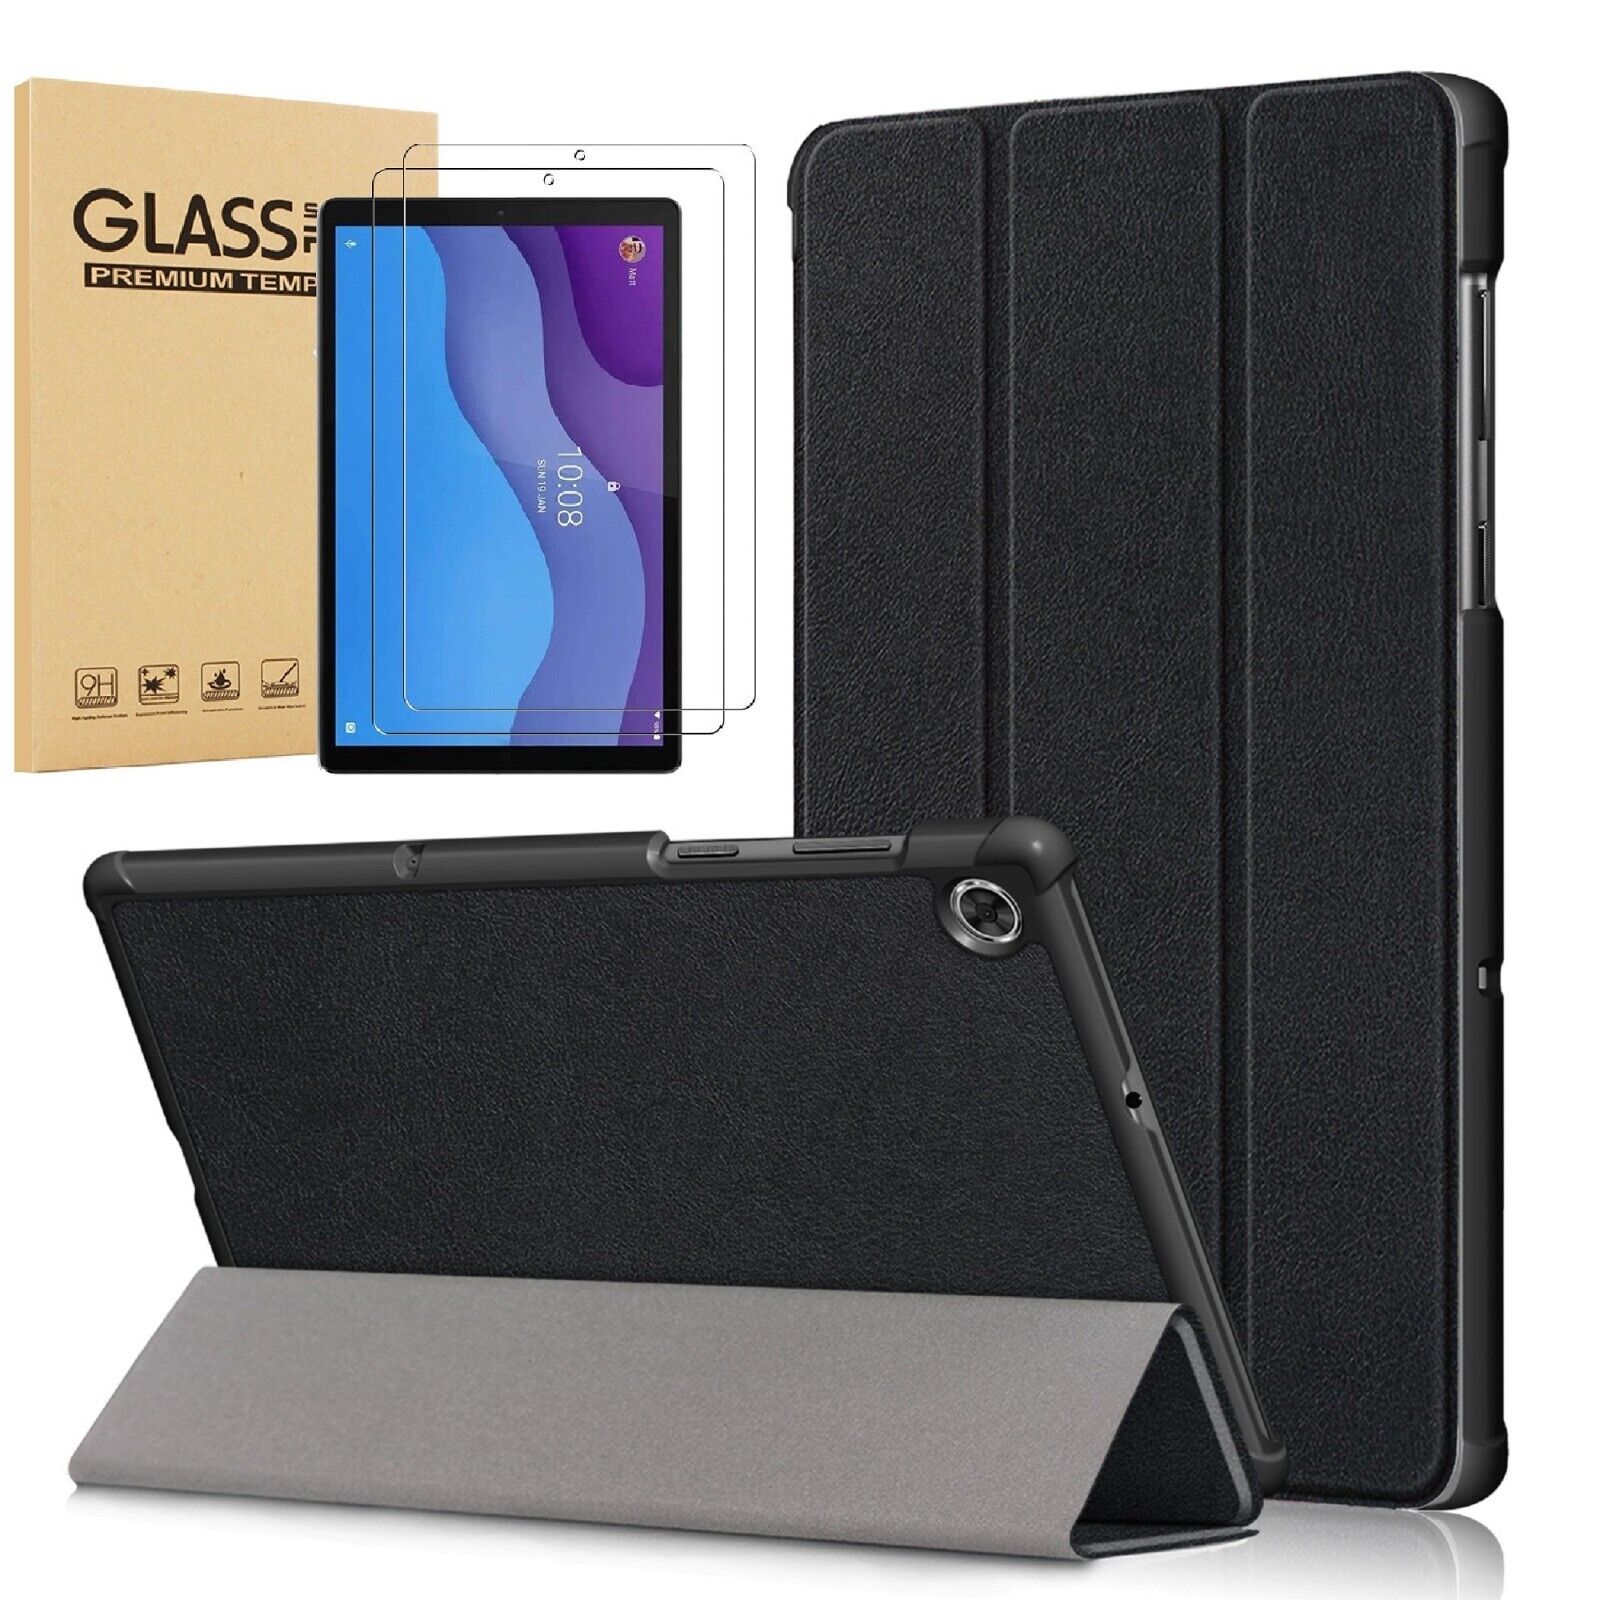 Lenovo Tab M10 HD (2nd Gen) Case Smart Stand Cover for Tab M10 HD 10.1